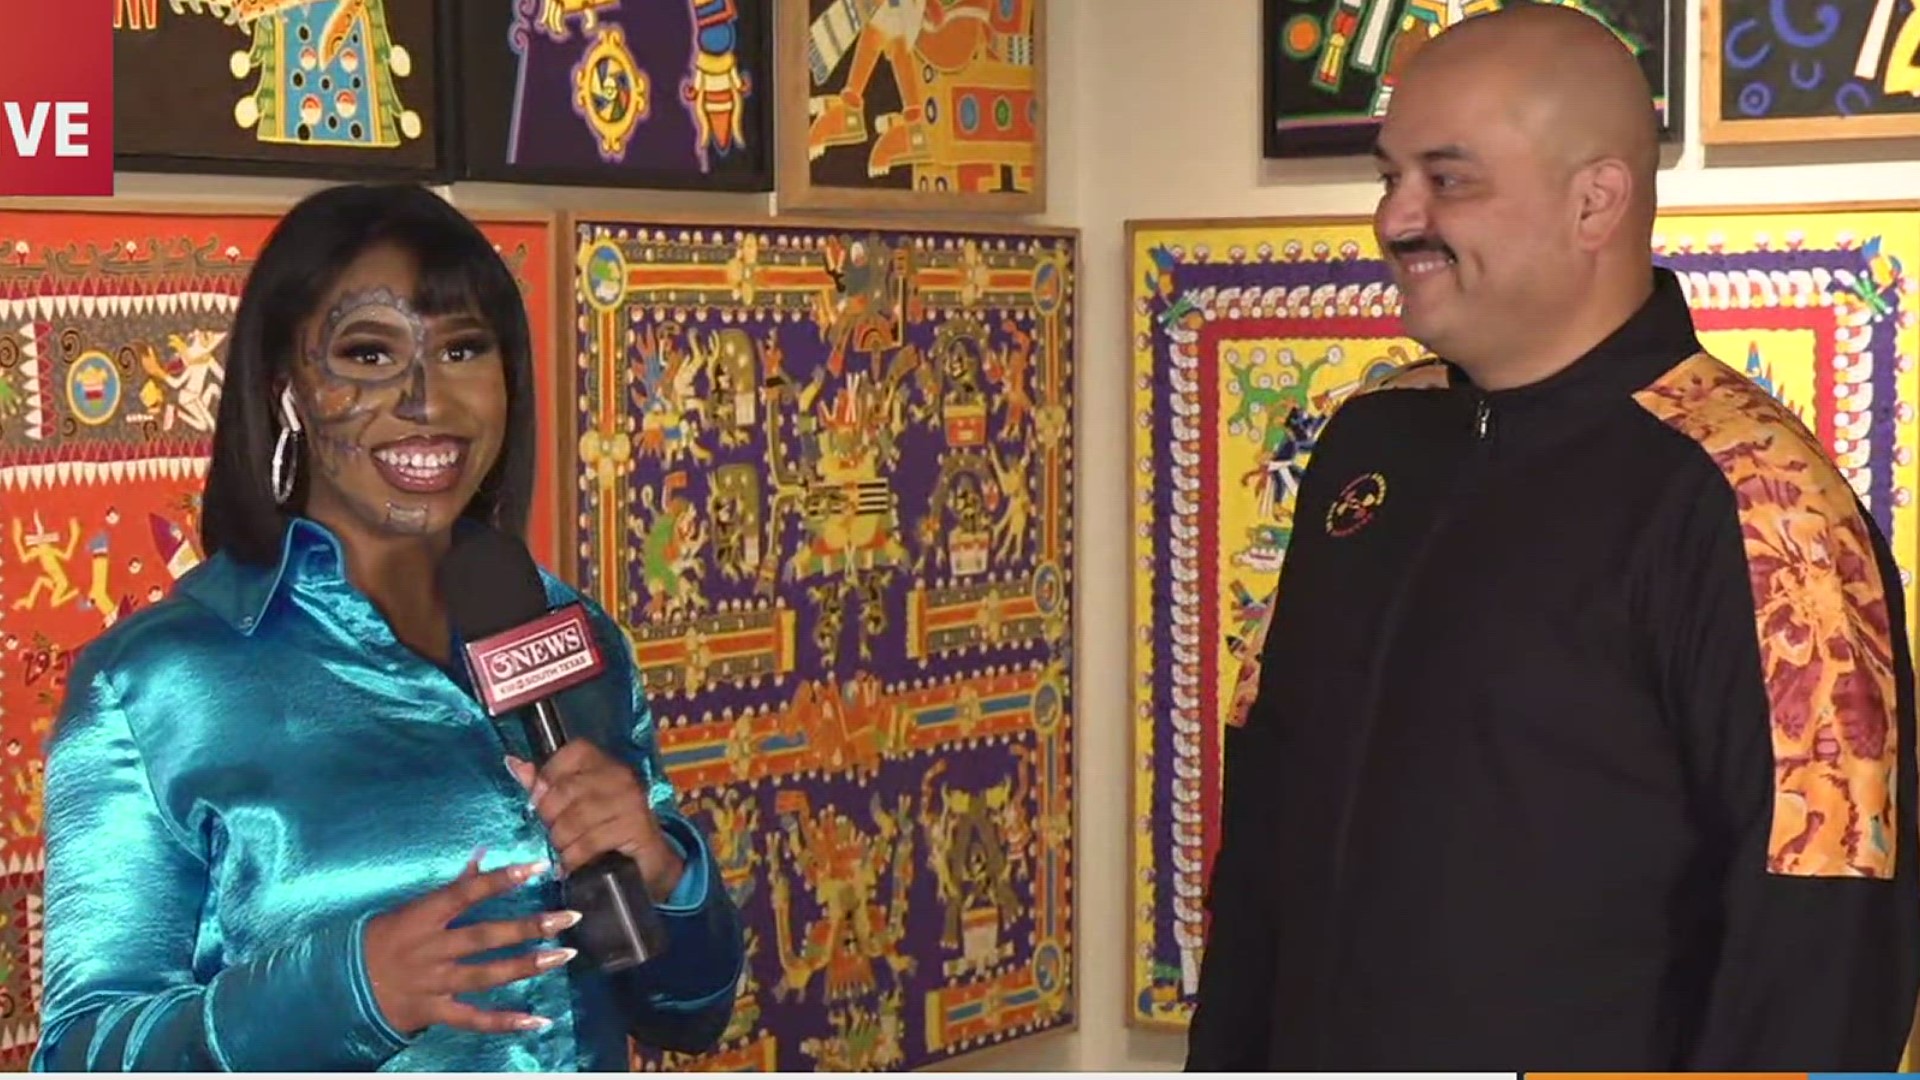 3NEWS' Simoné Simpson and Día de los Muertos chair Omar Lopez discuss the plans set for this year's upcoming festival and what attendees can expect.